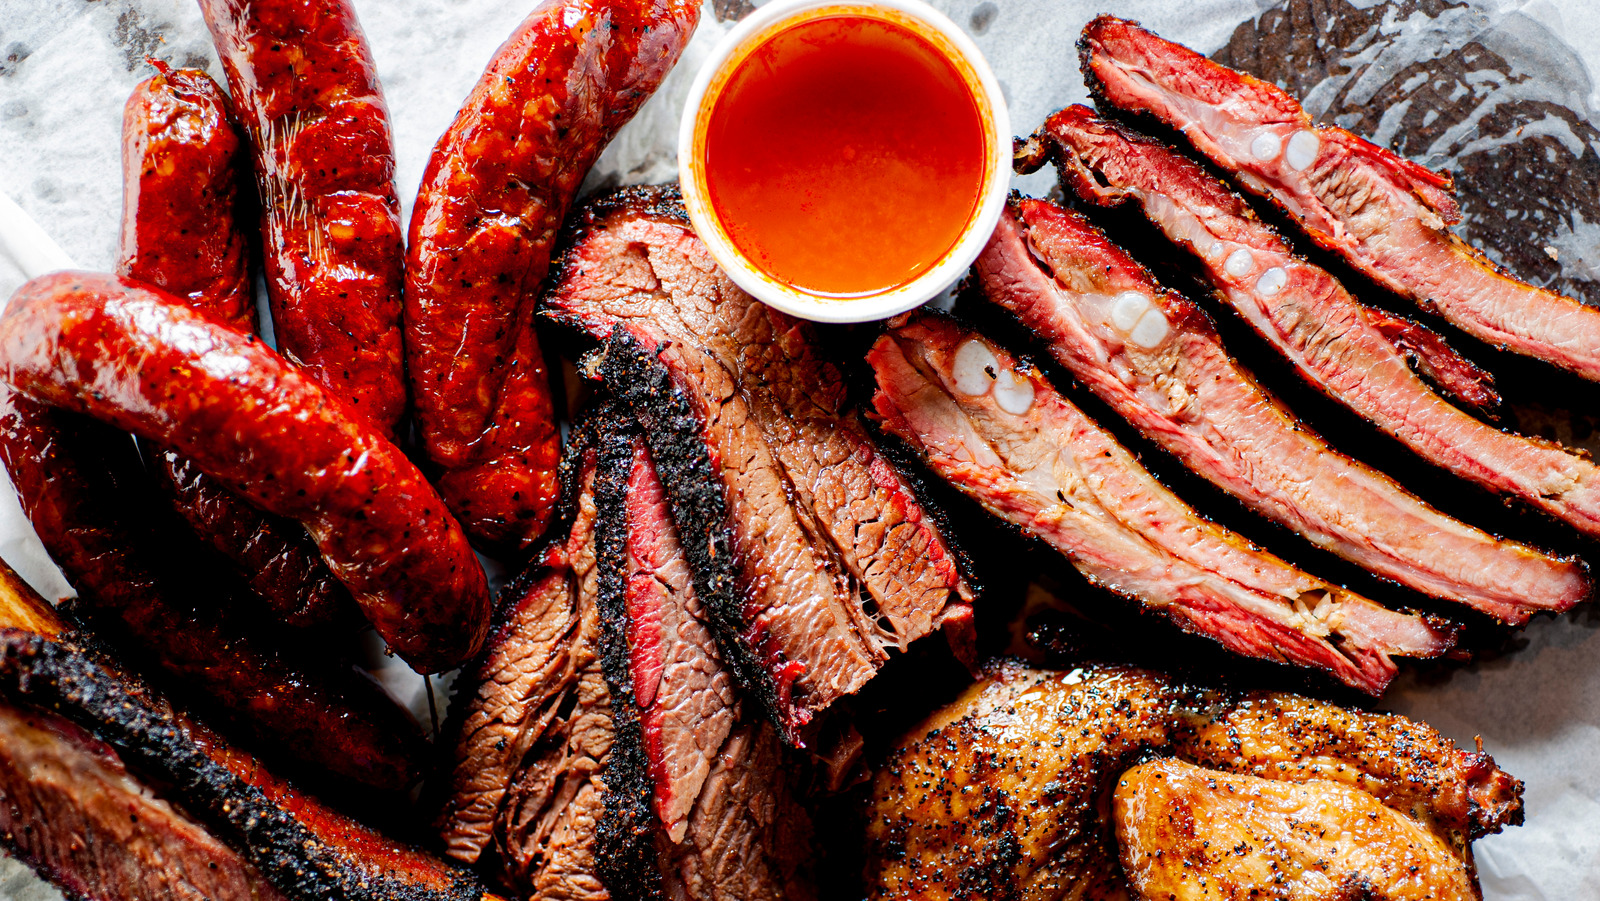 https://www.tastingtable.com/img/gallery/the-absolute-best-bbq-restaurants-in-the-us/l-intro-1650990107.jpg